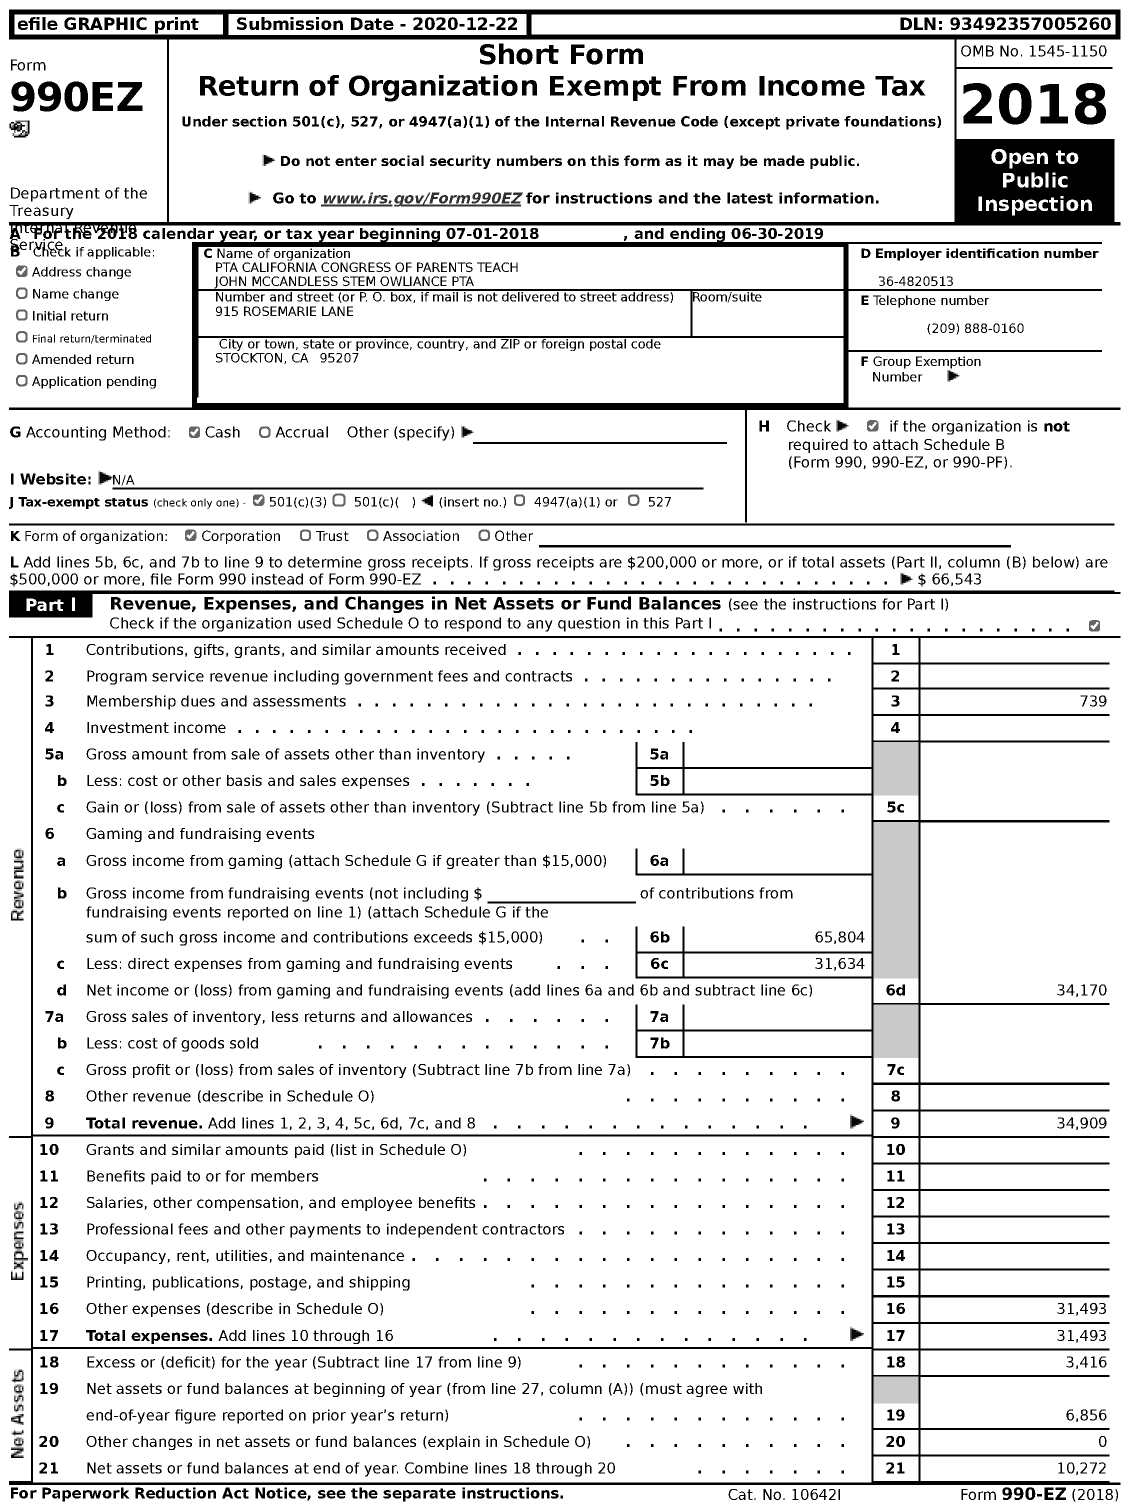 Image of first page of 2018 Form 990EZ for California State PTA - John Mccandless Stem Owliance PTA